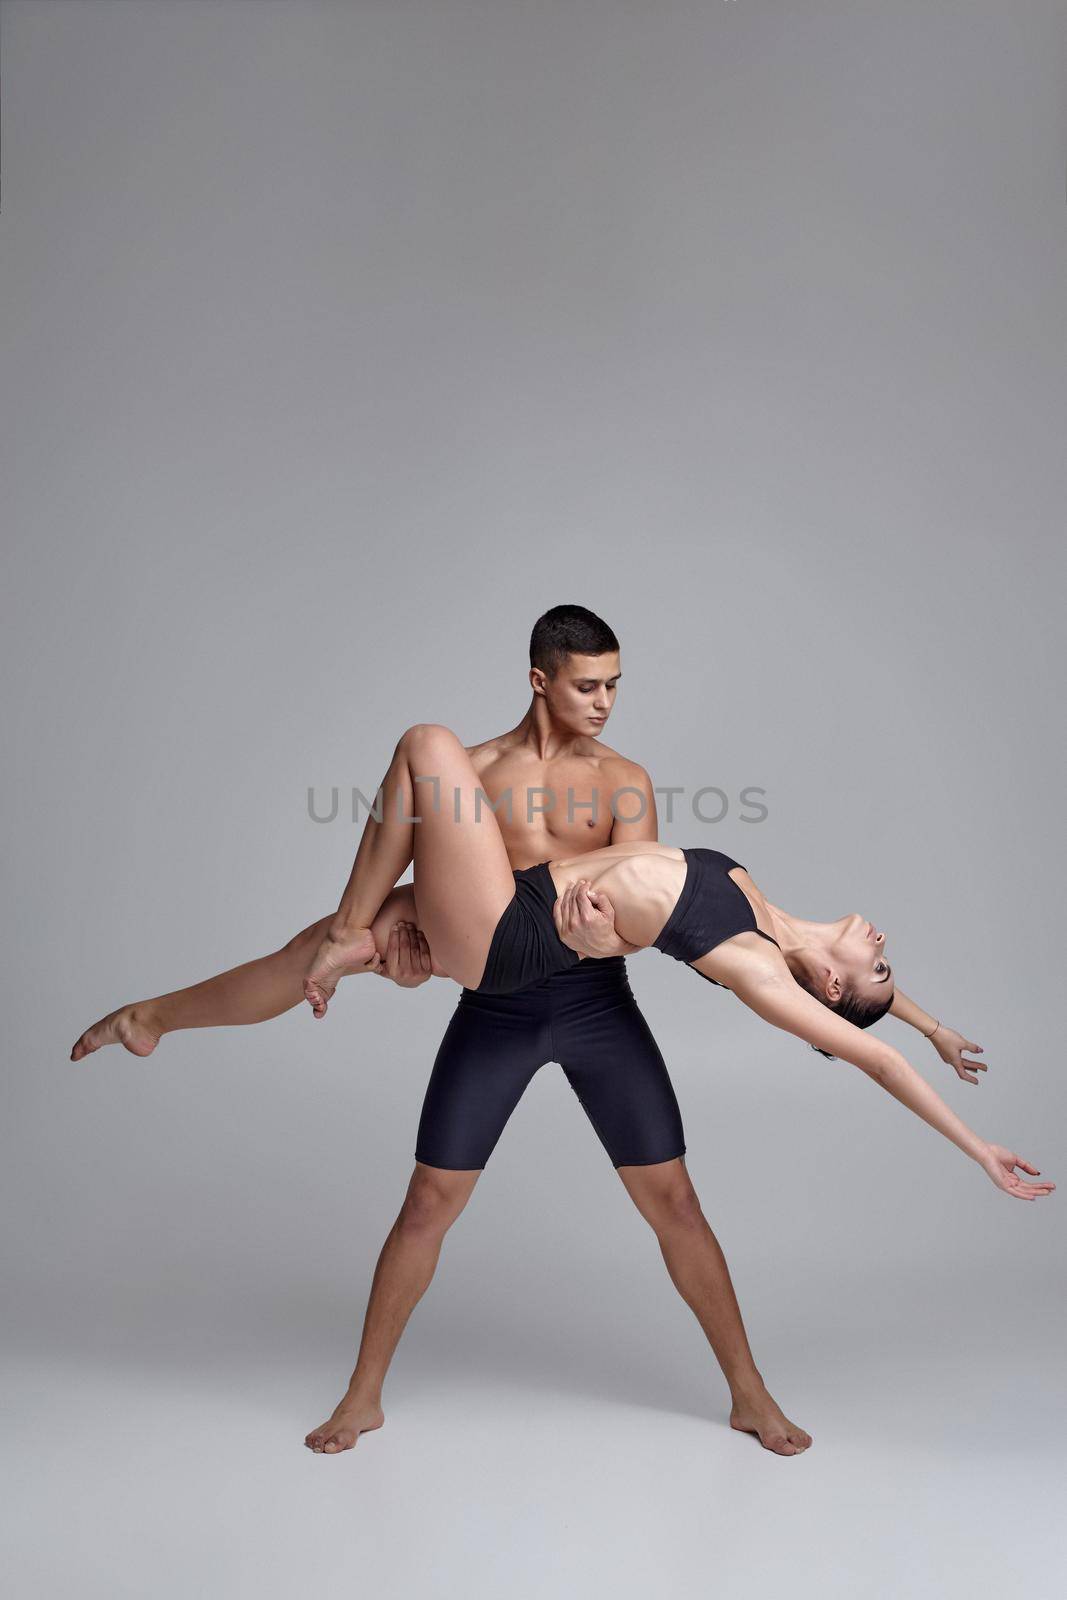 Two modern ballet dancers in black suits are posing over a gray studio background. Good-looking man in black shorts is holding a charming woman in a black swimwear. Ballet and contemporary choreography concept. Art photo.